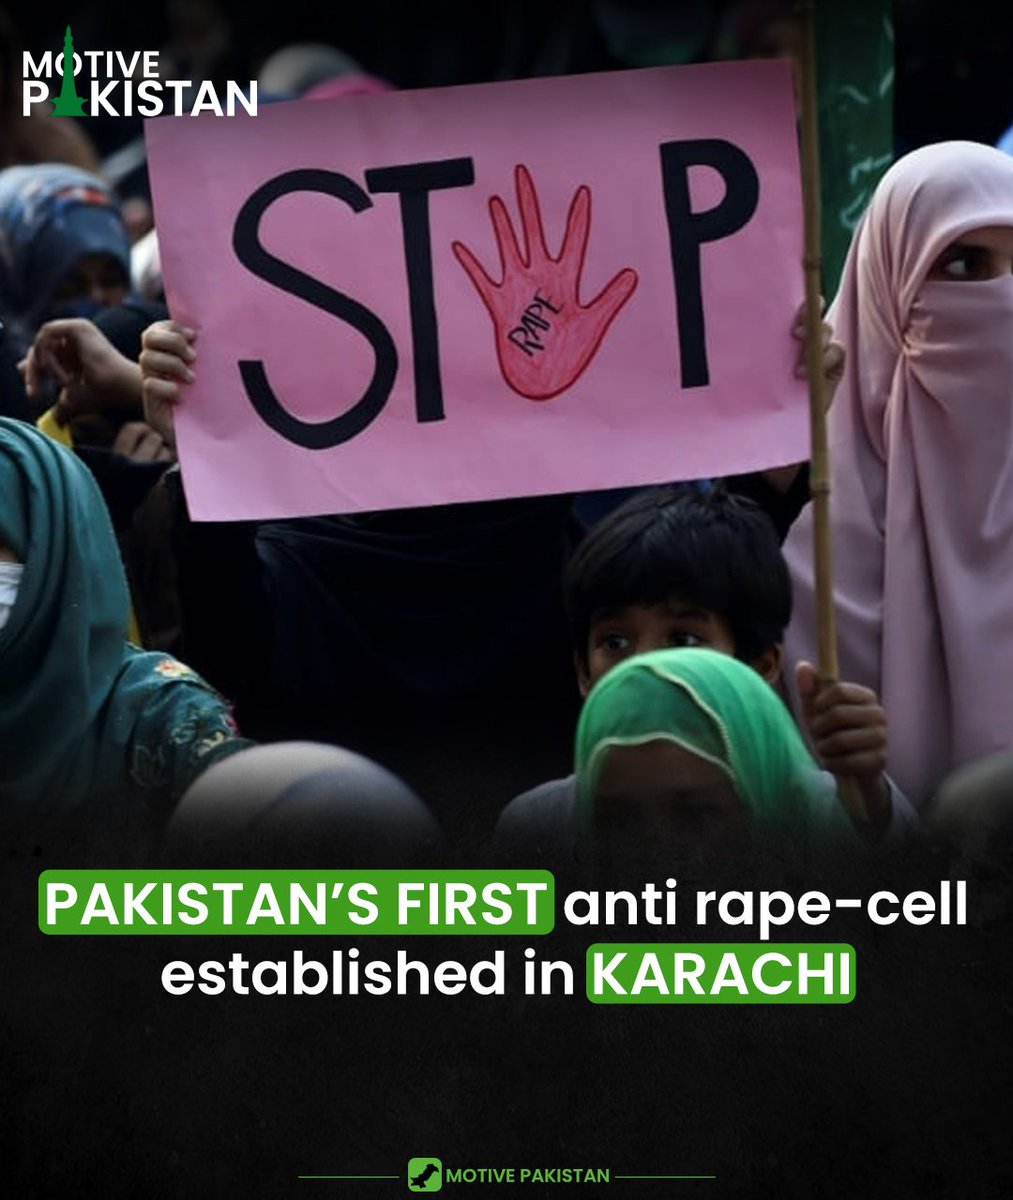 KARACHI: A much-needed facility for survivors of sexual violence was established in the port city Friday.

#Antirape #Cell #Establised #Karachi #Assault #Woemn #Sexualviolence #Pakistan #motivepakistan #RescueRecoverRebuild